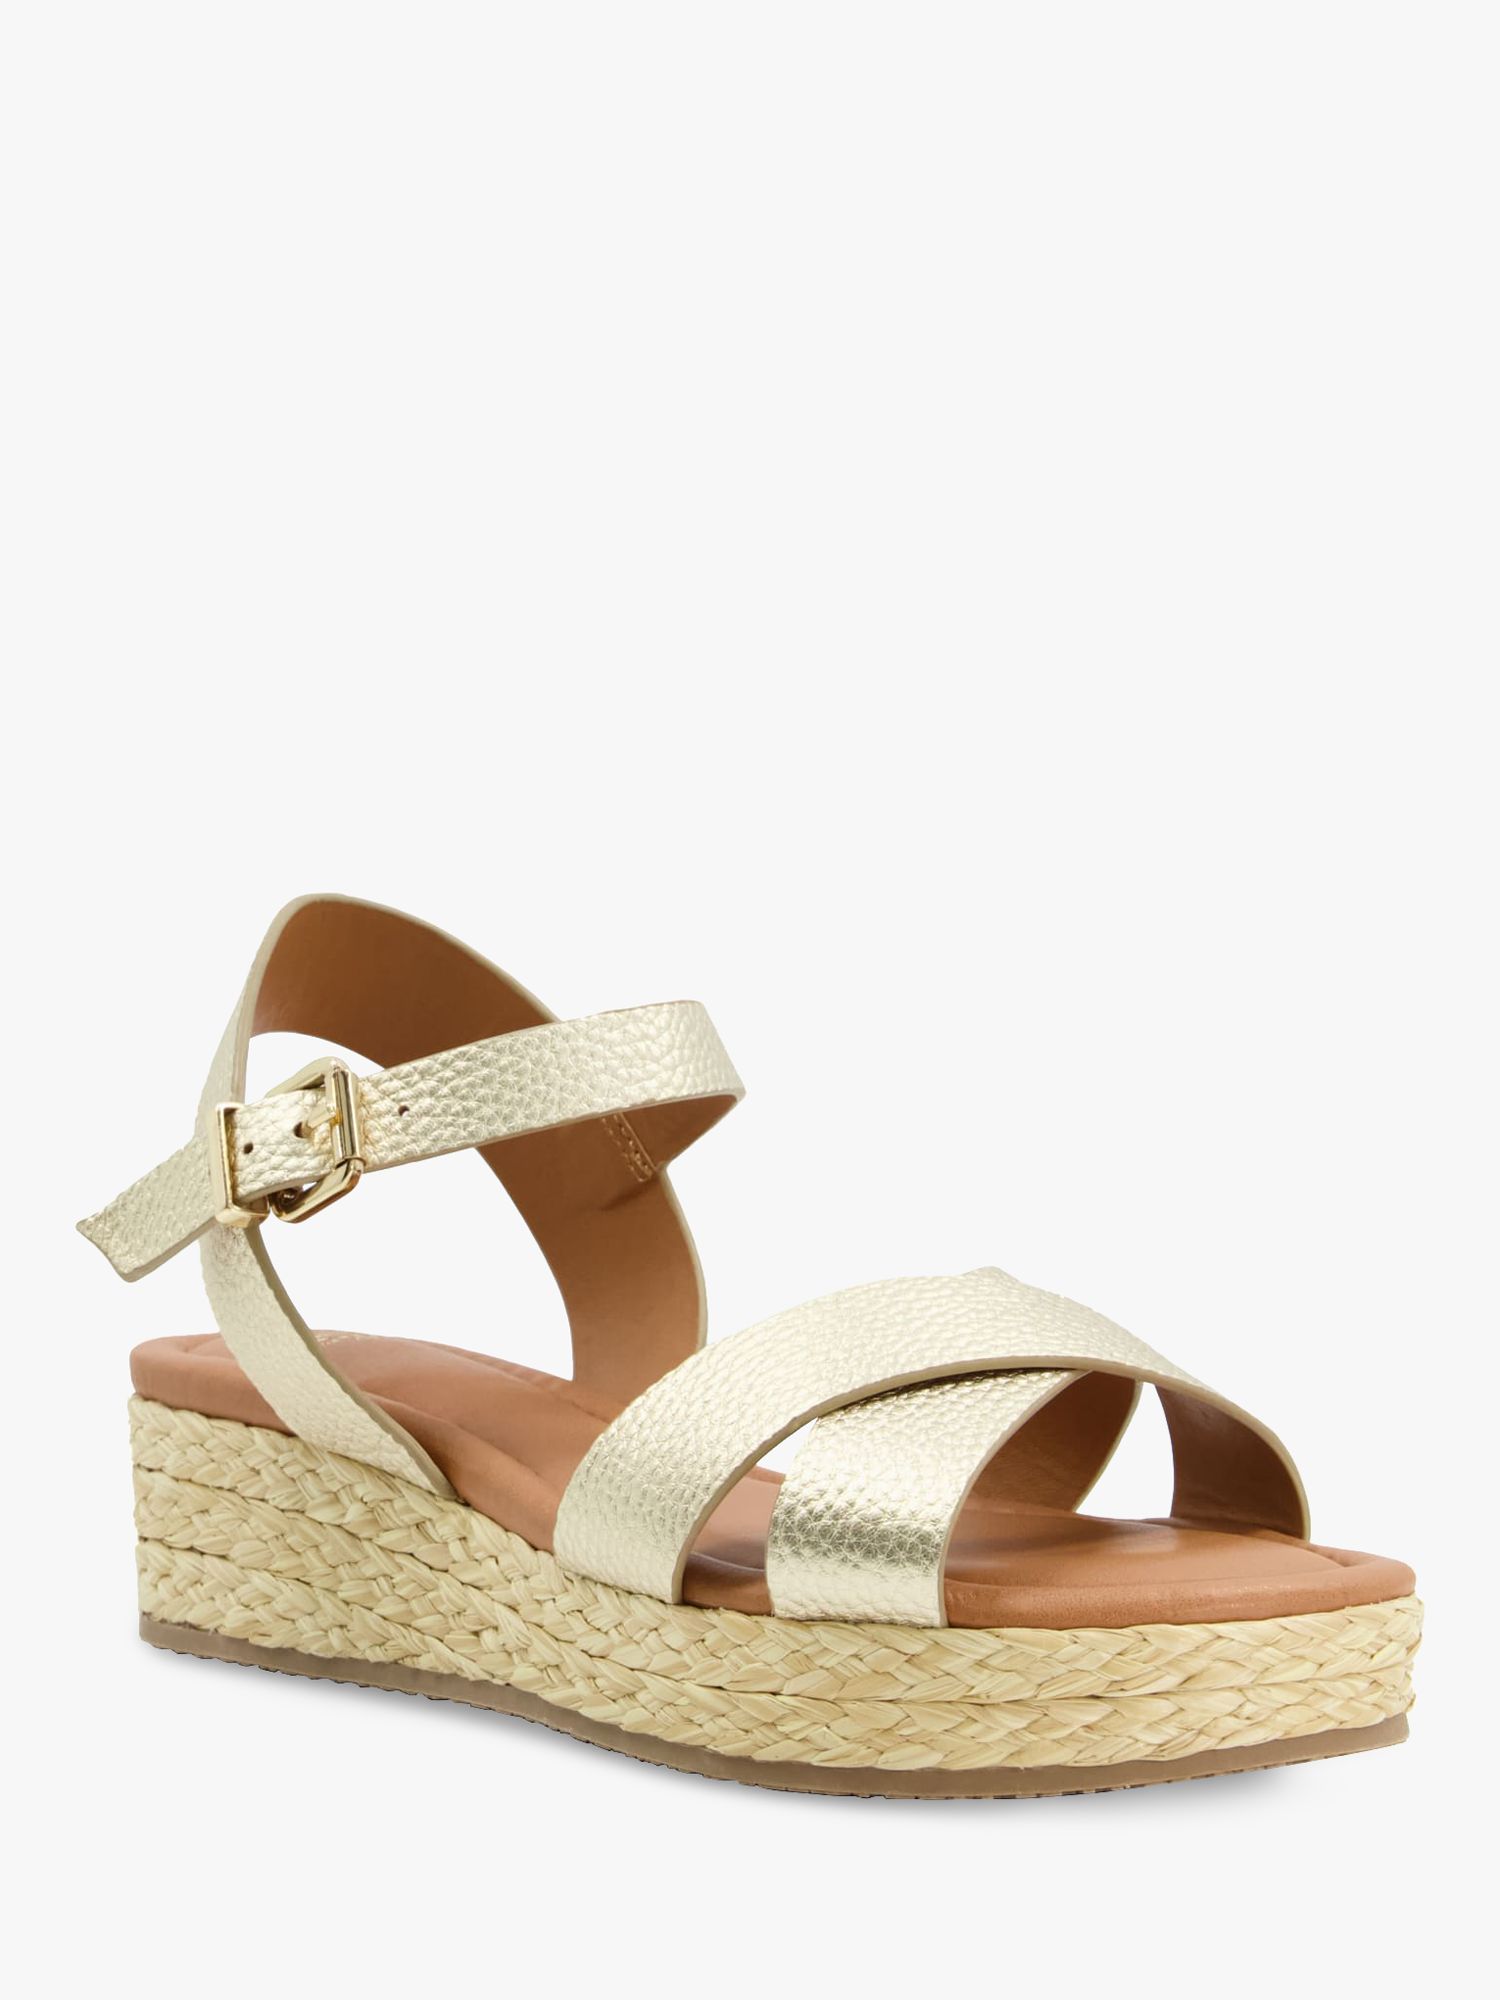 Buy Dune Linnie Leather Cross Strap Sandals, Gold Online at johnlewis.com